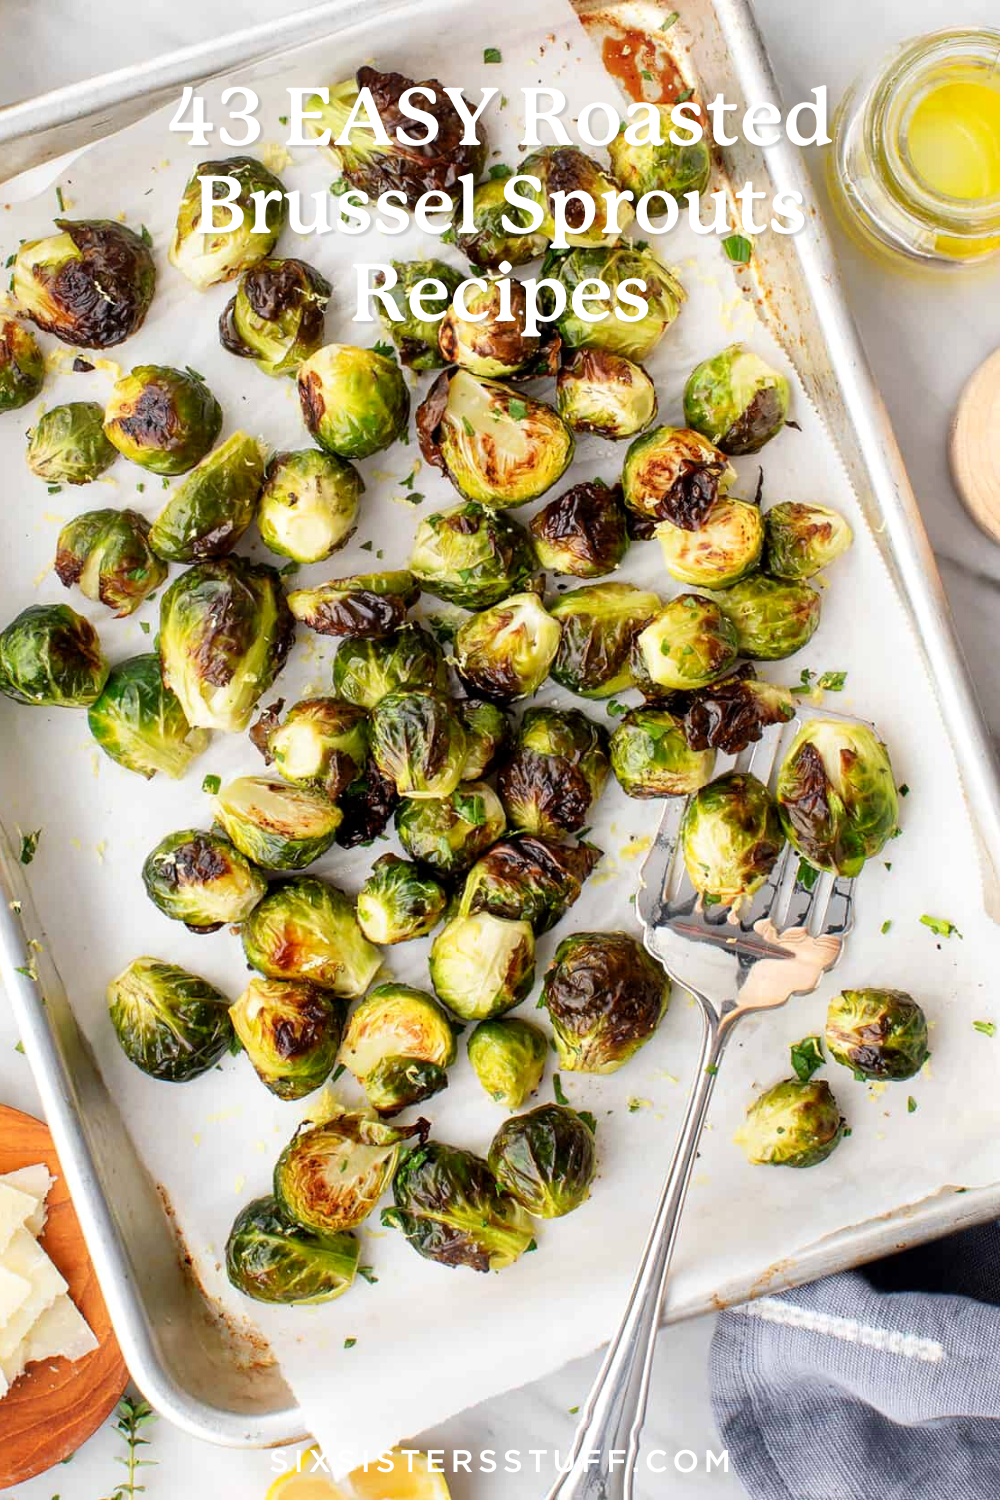 43 EASY Roasted Brussel Sprouts Recipes